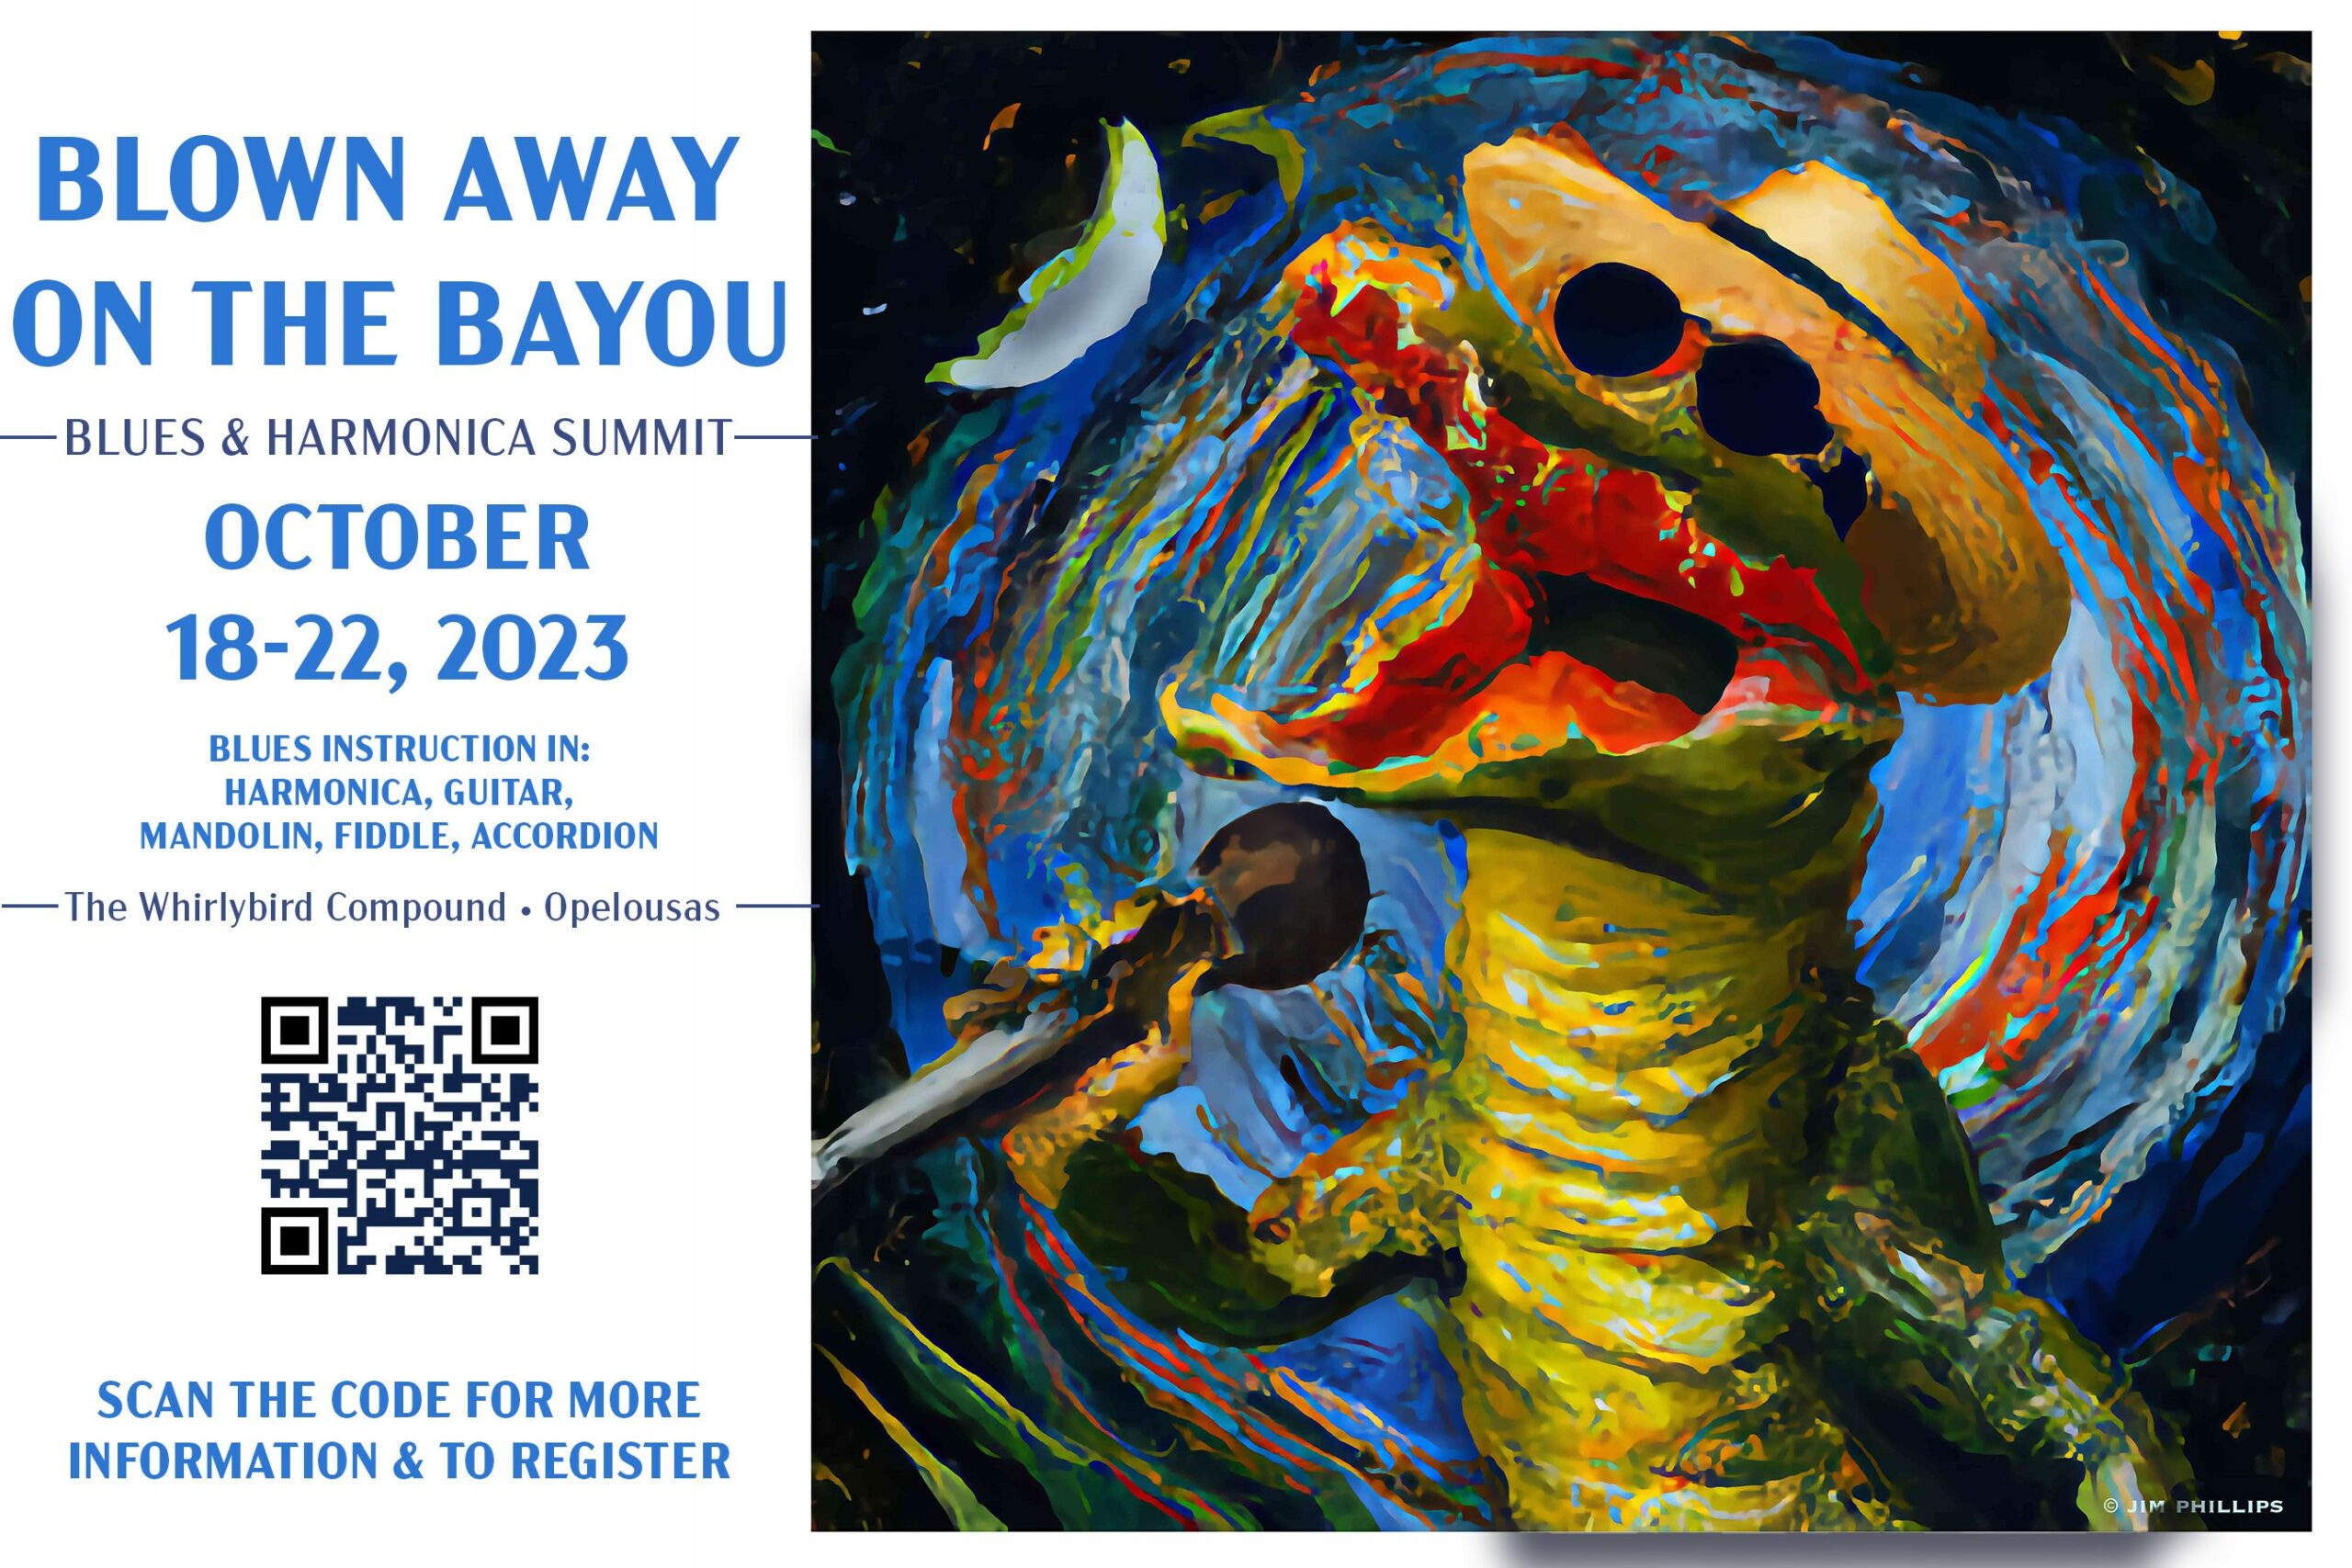 Blown Away on The Bayou 2023 – Oct 18-22 – SPAH member discount available!